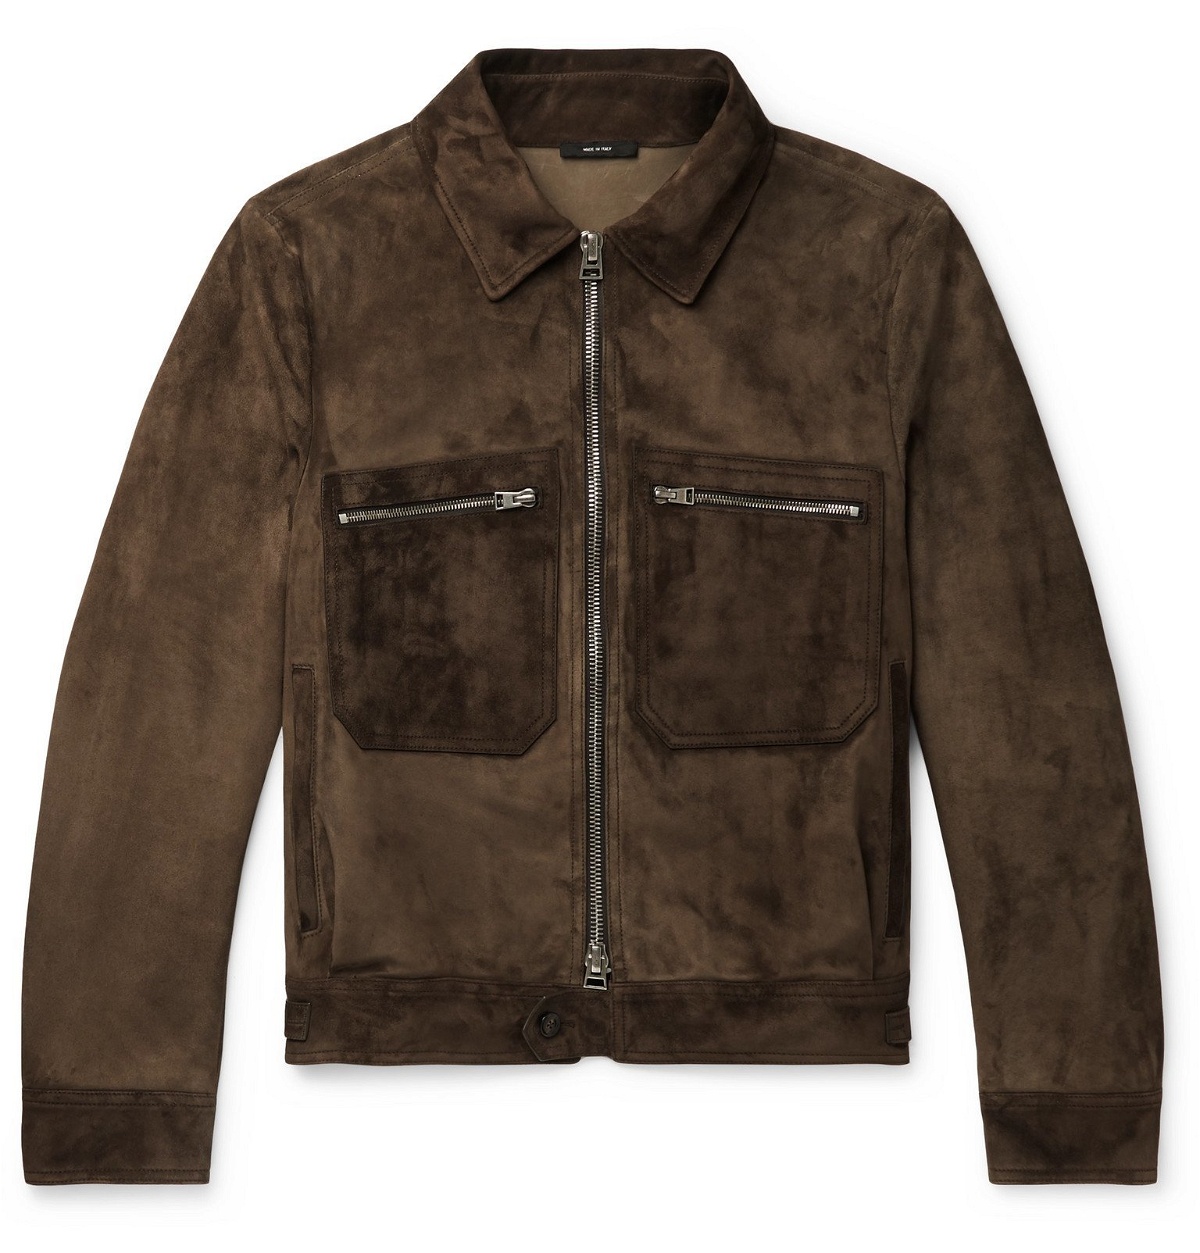 TOM FORD - Suede Blouson Jacket - Brown TOM FORD